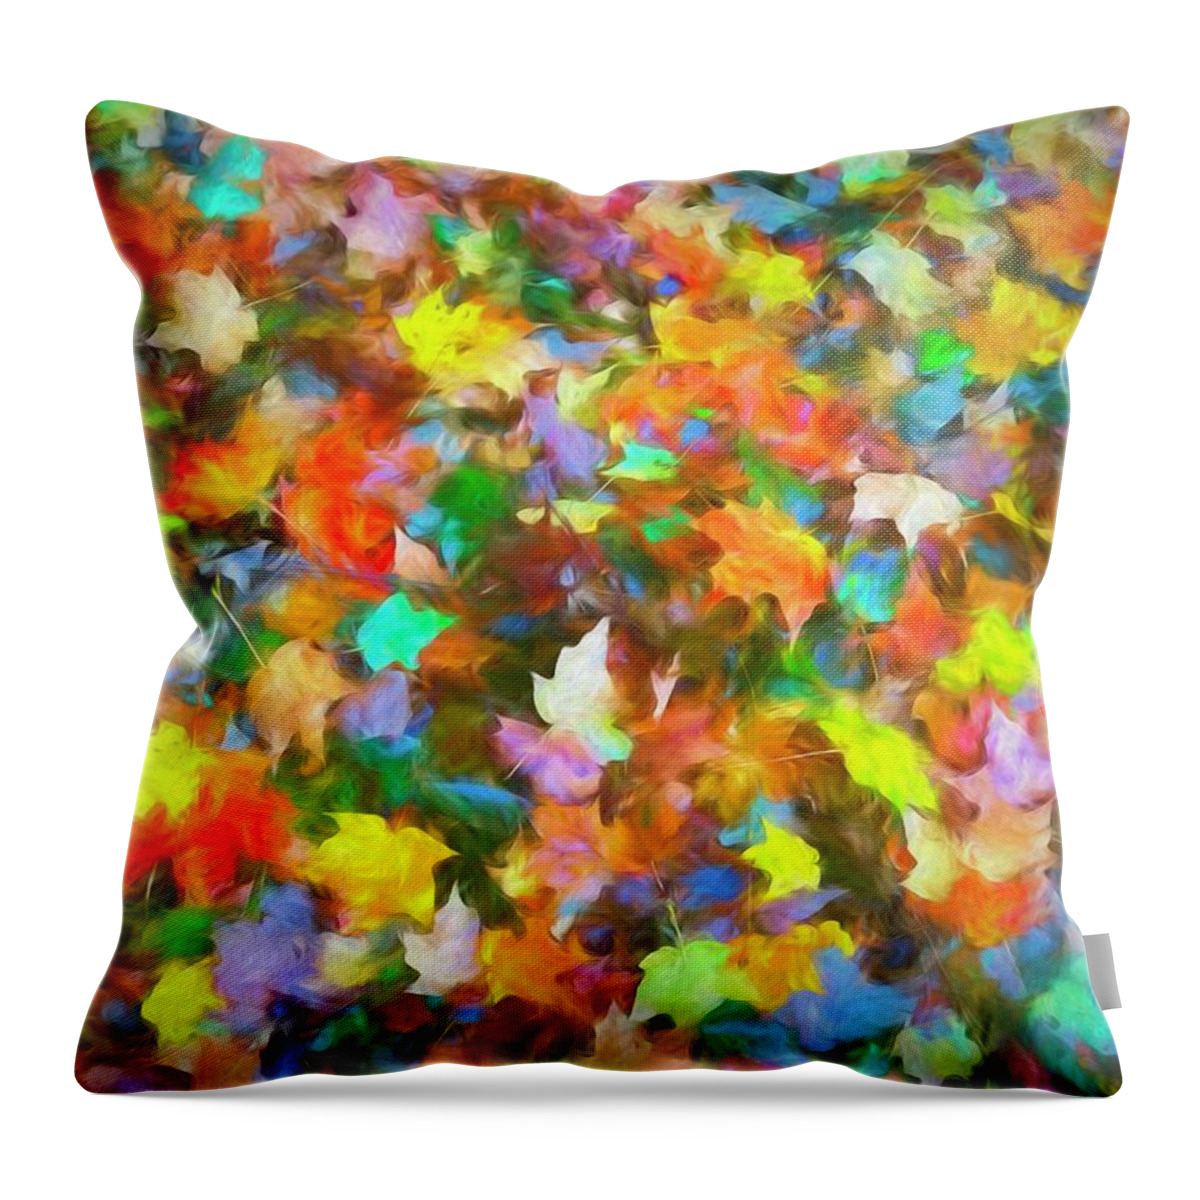  Throw Pillow featuring the photograph Autumn's Last Gift by Jack Wilson